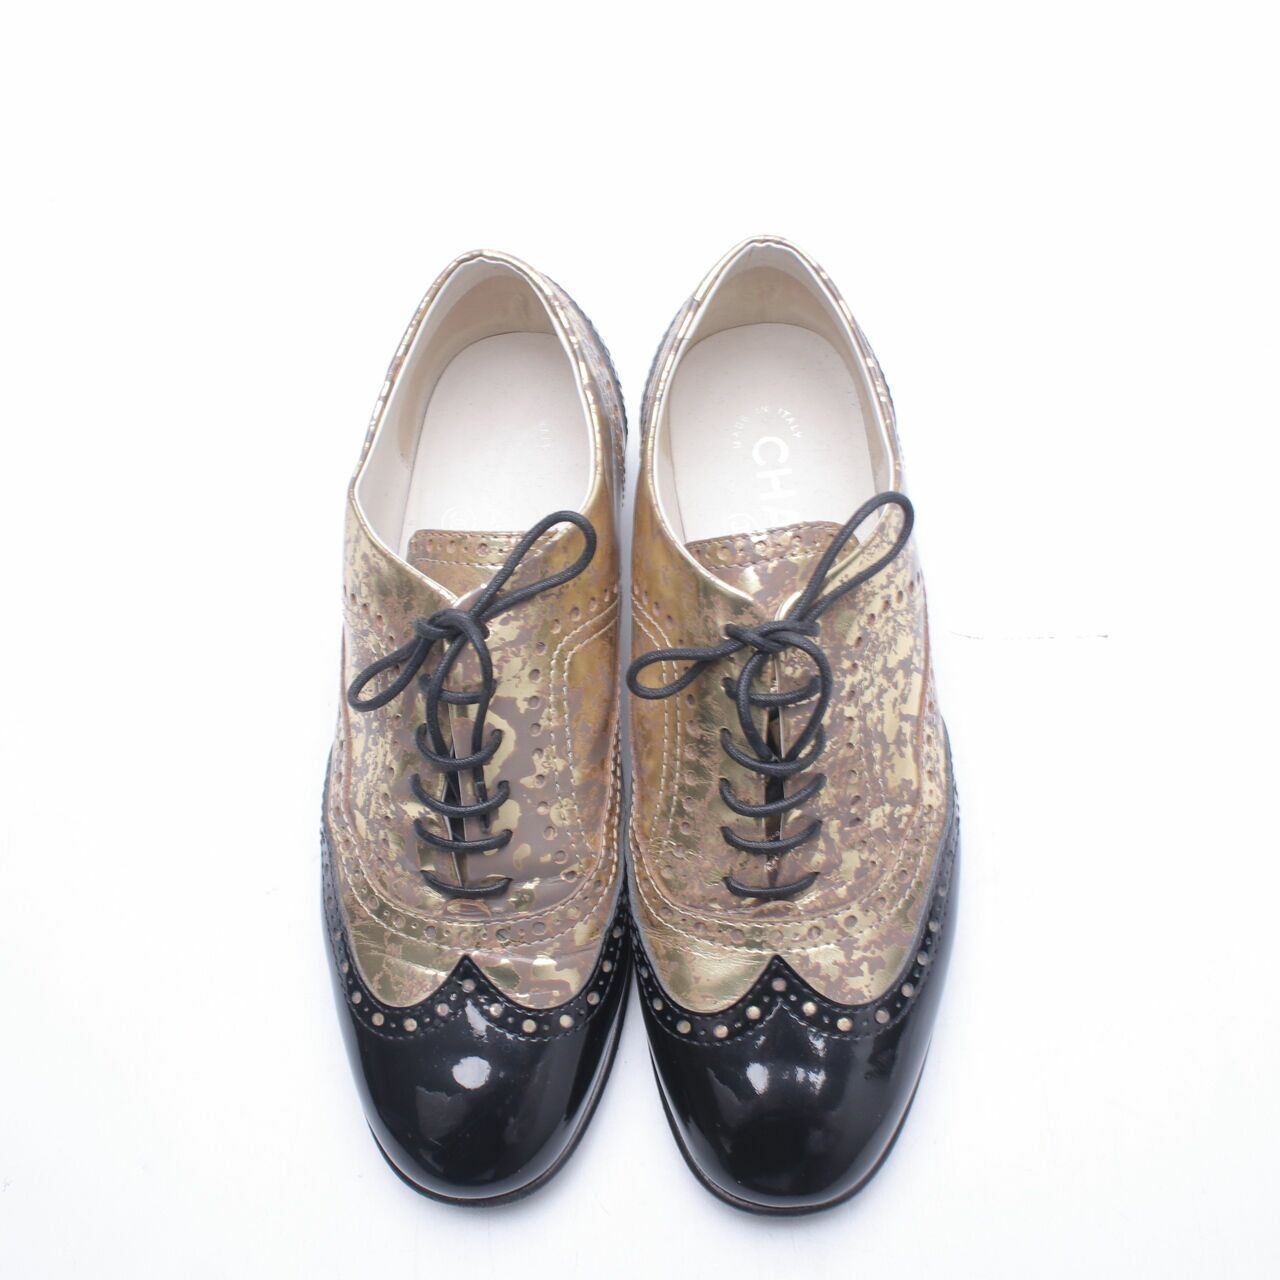  Chanel Metallic Gold And Black Patent Brogue Leather Lace-Up Oxford Flats 